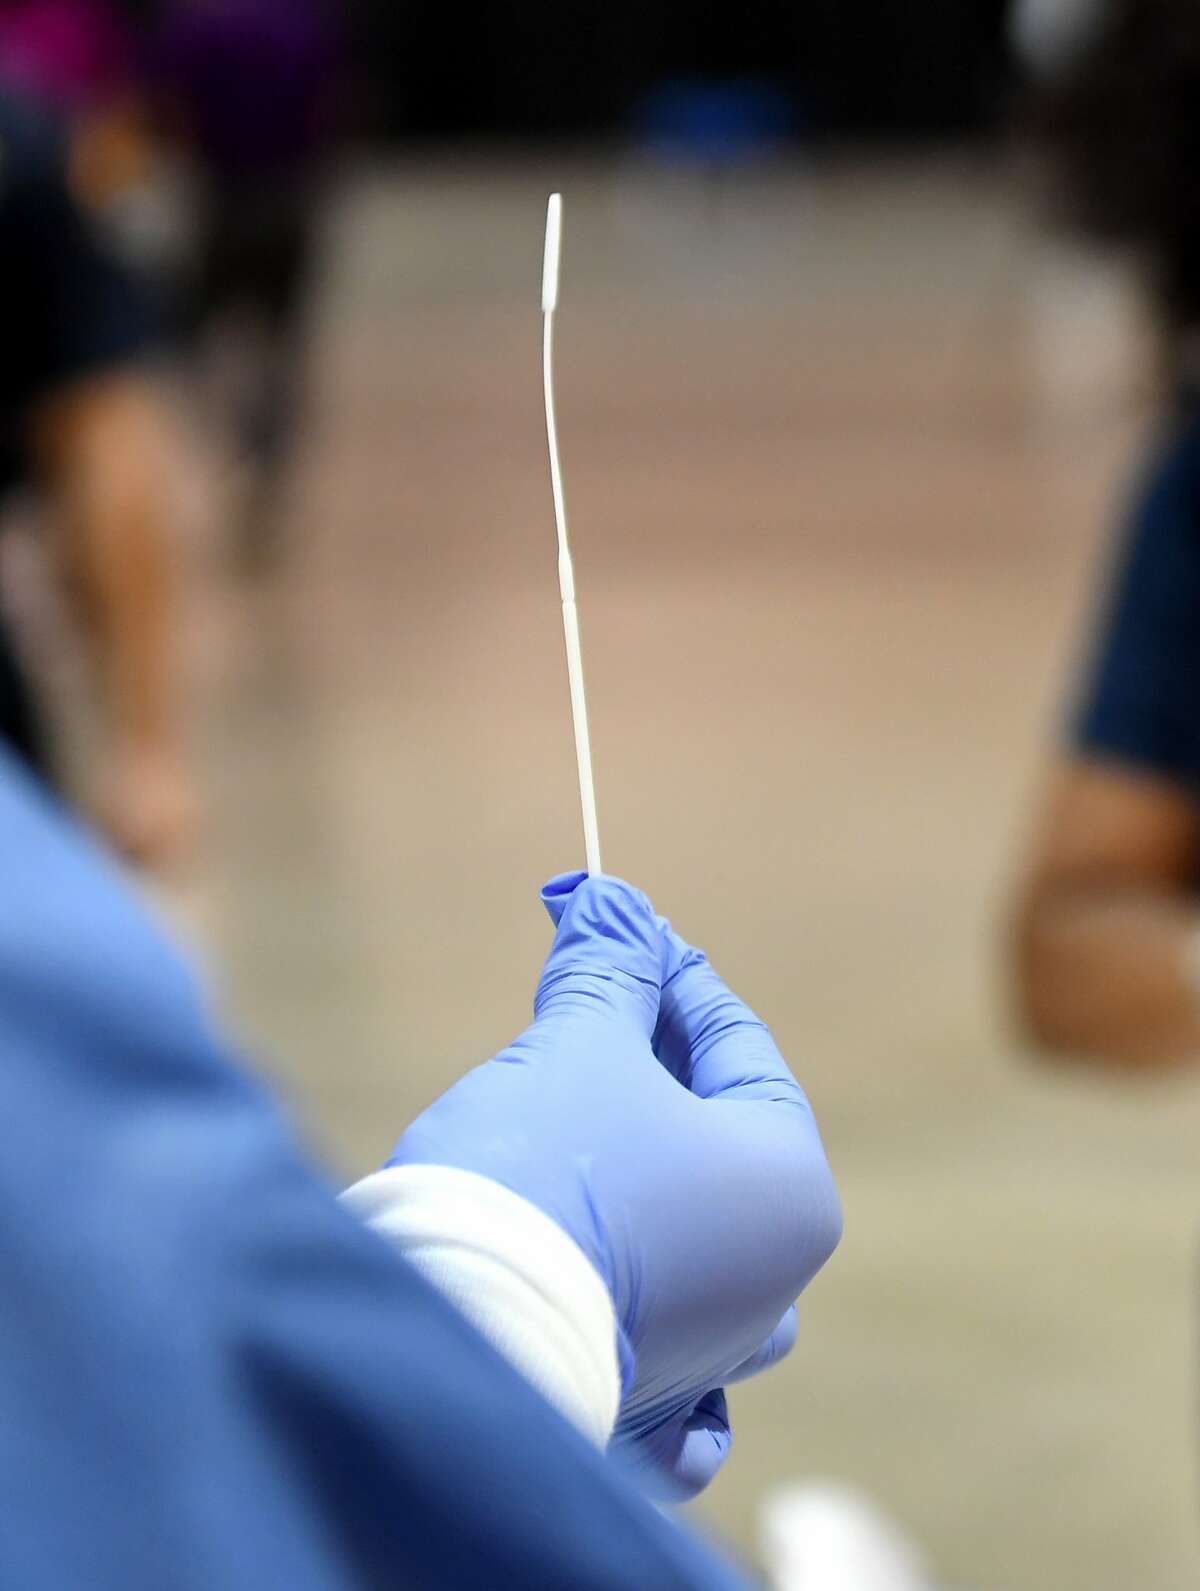 File -- A sterile cotton swab is used in testing for coronavirus (COVID-19).